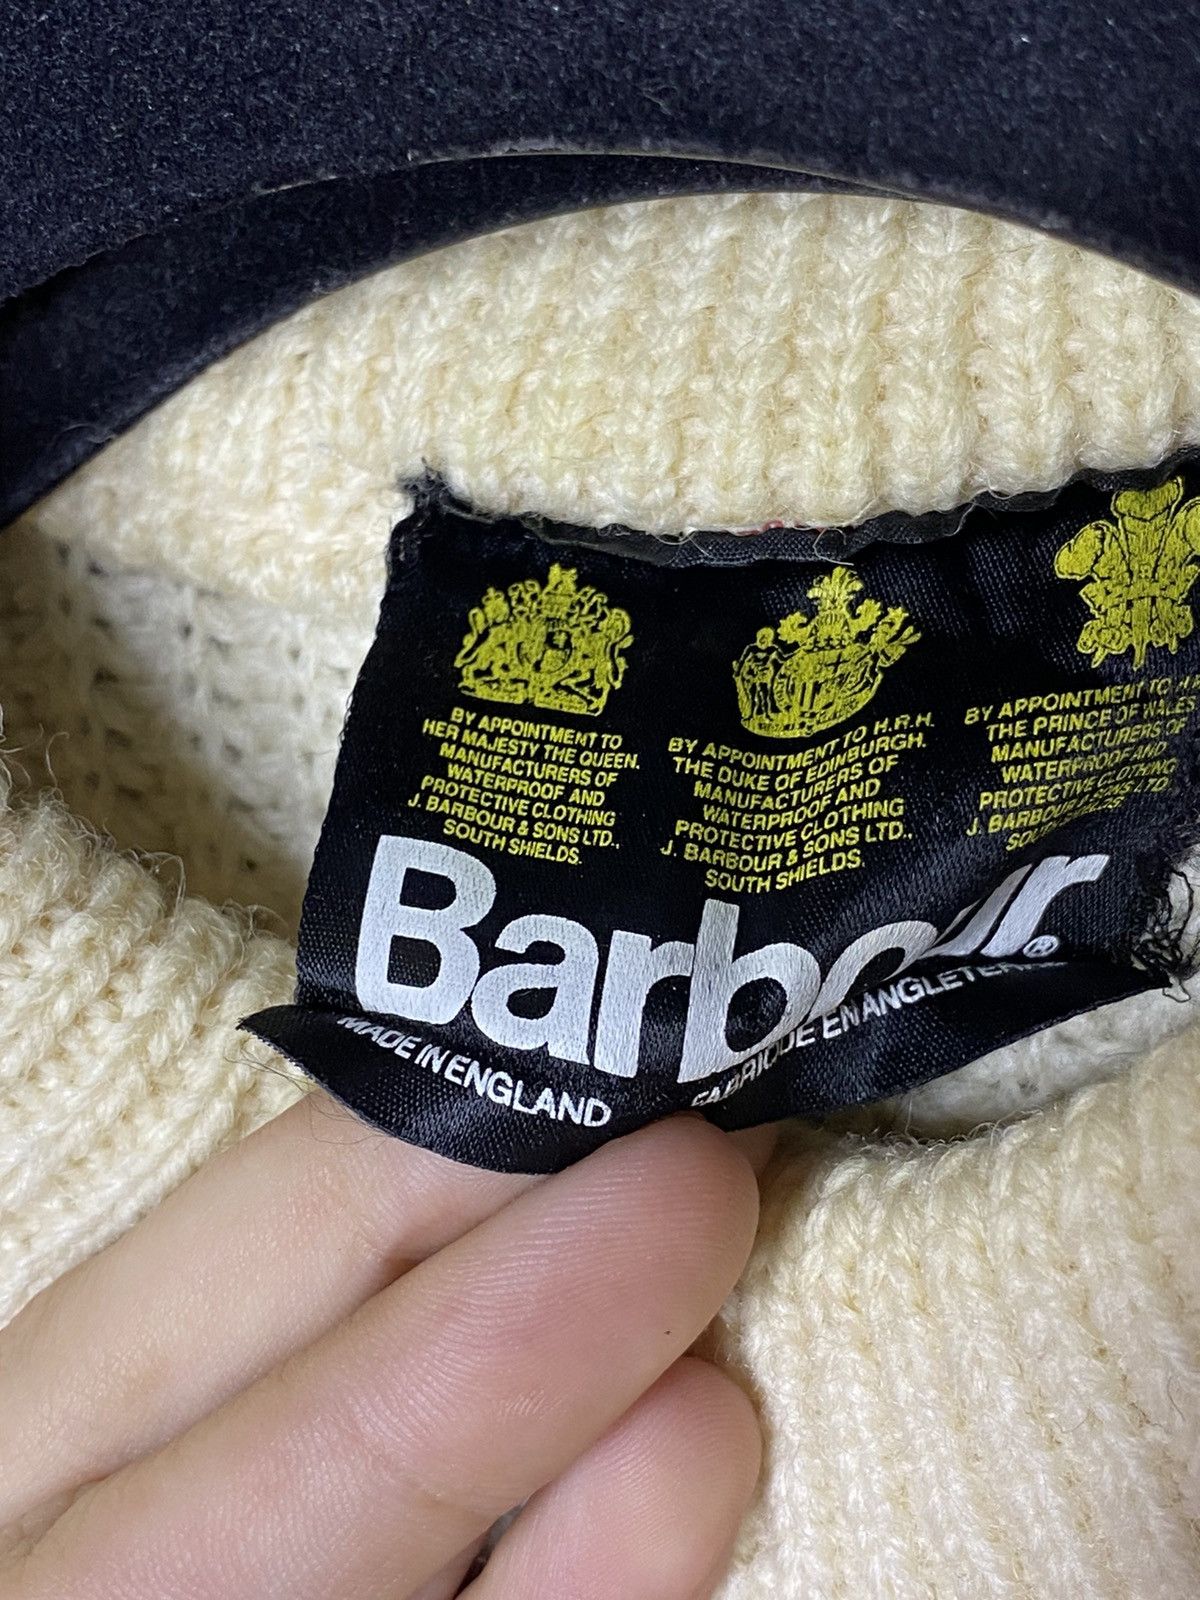 Barbour Barbour Vintage 80s Fisherman Knitted Sweater Wool Rare Size US L / EU 52-54 / 3 - 3 Preview